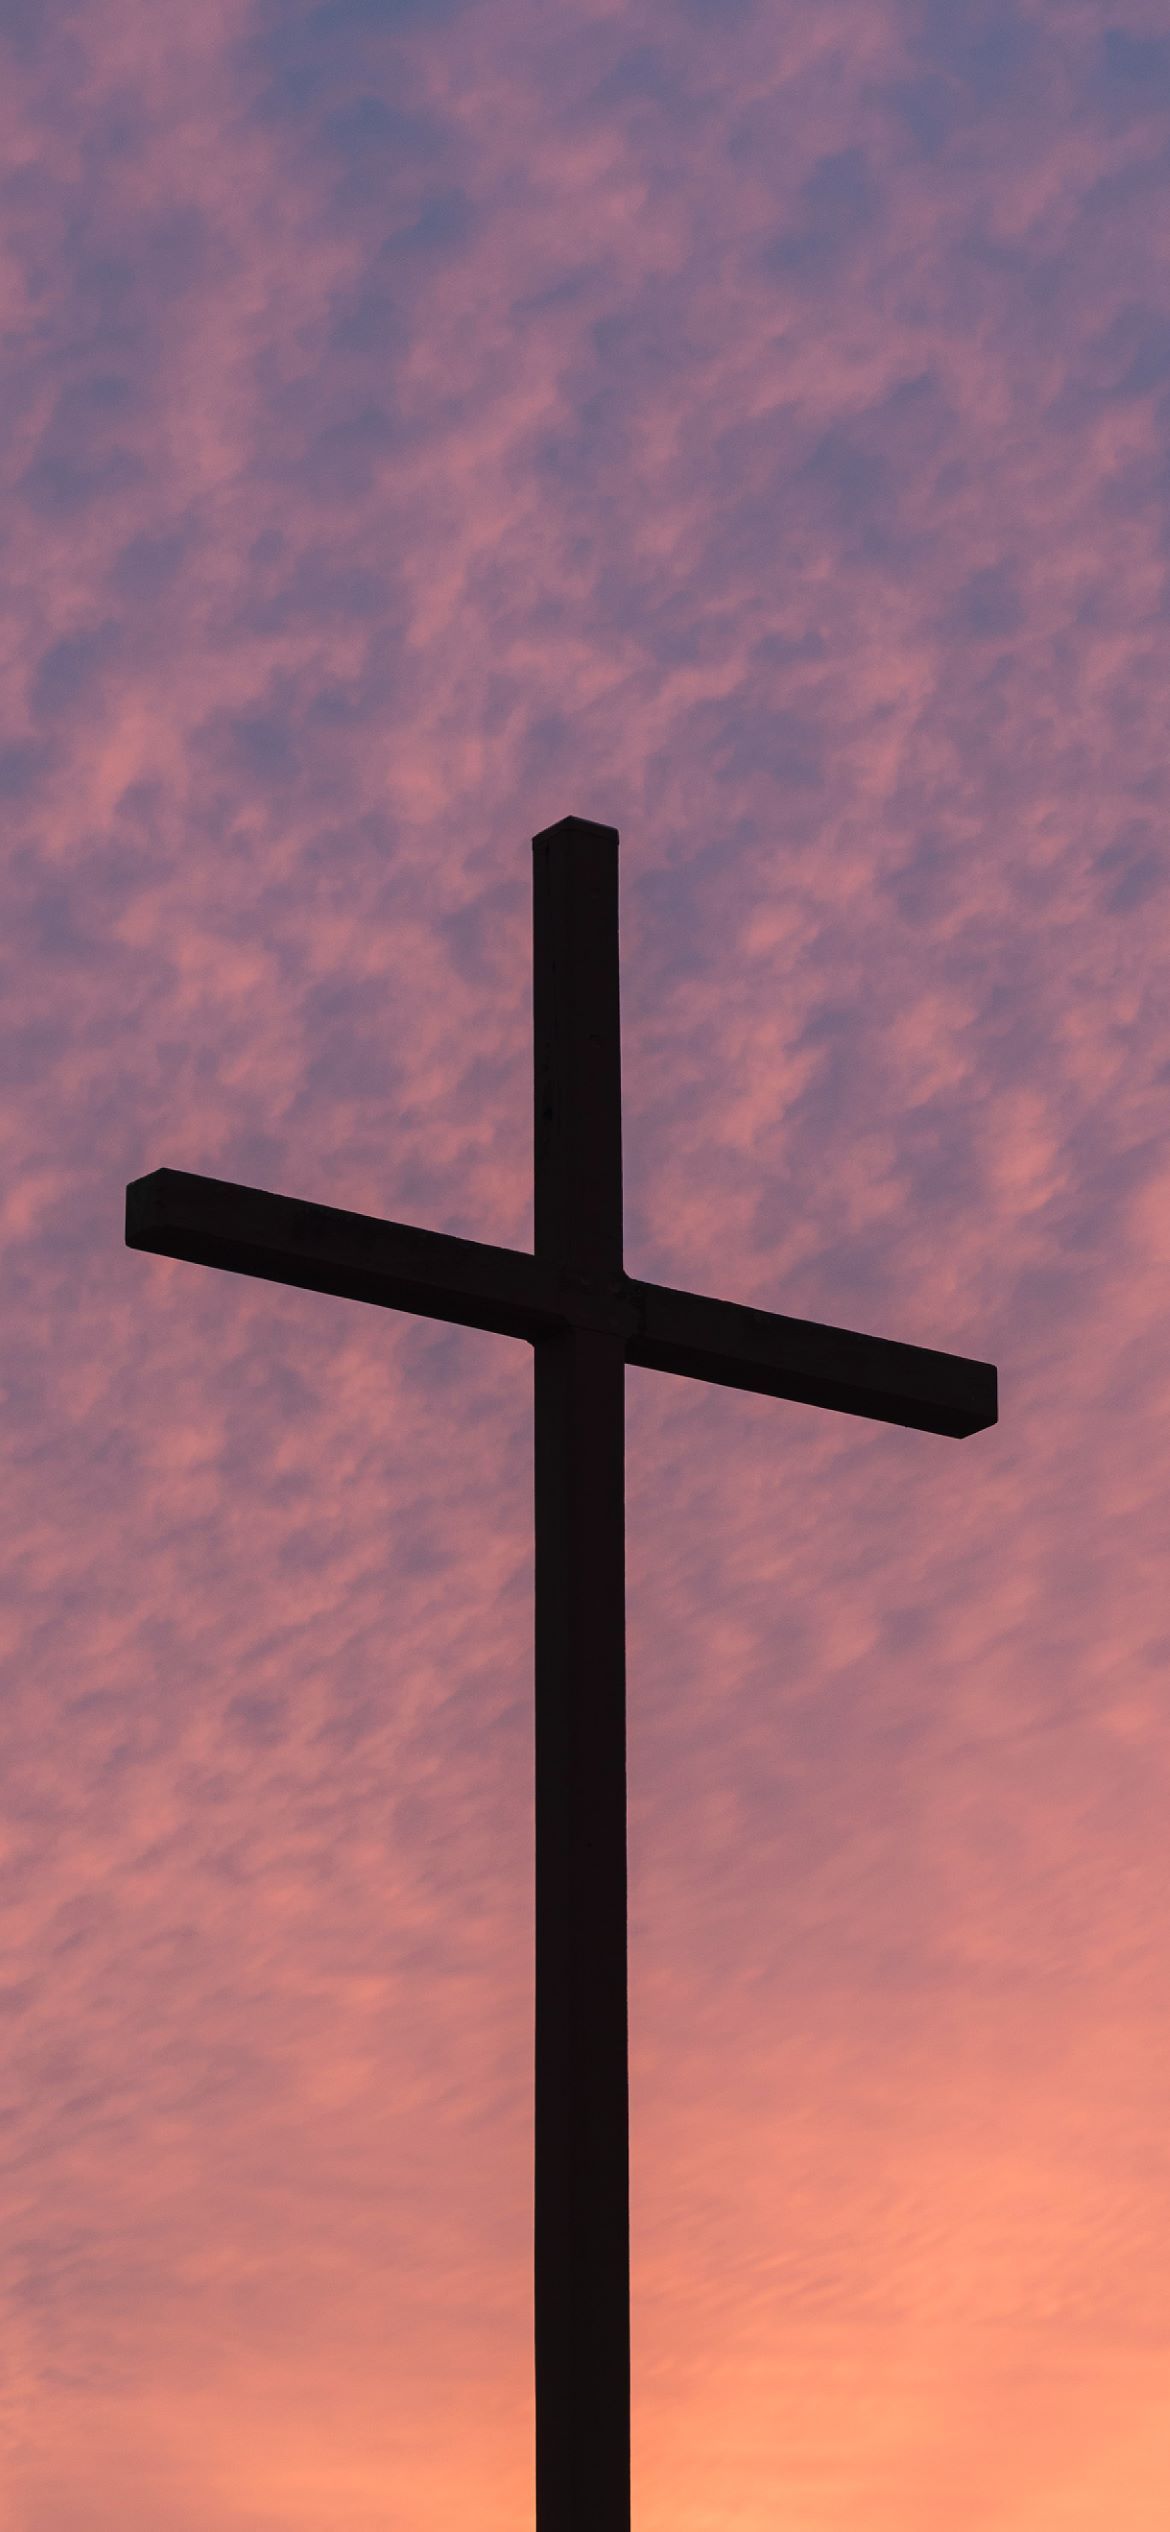 A cross silhouette in front of a pink and purple sunset sky. - Cross, christian iPhone